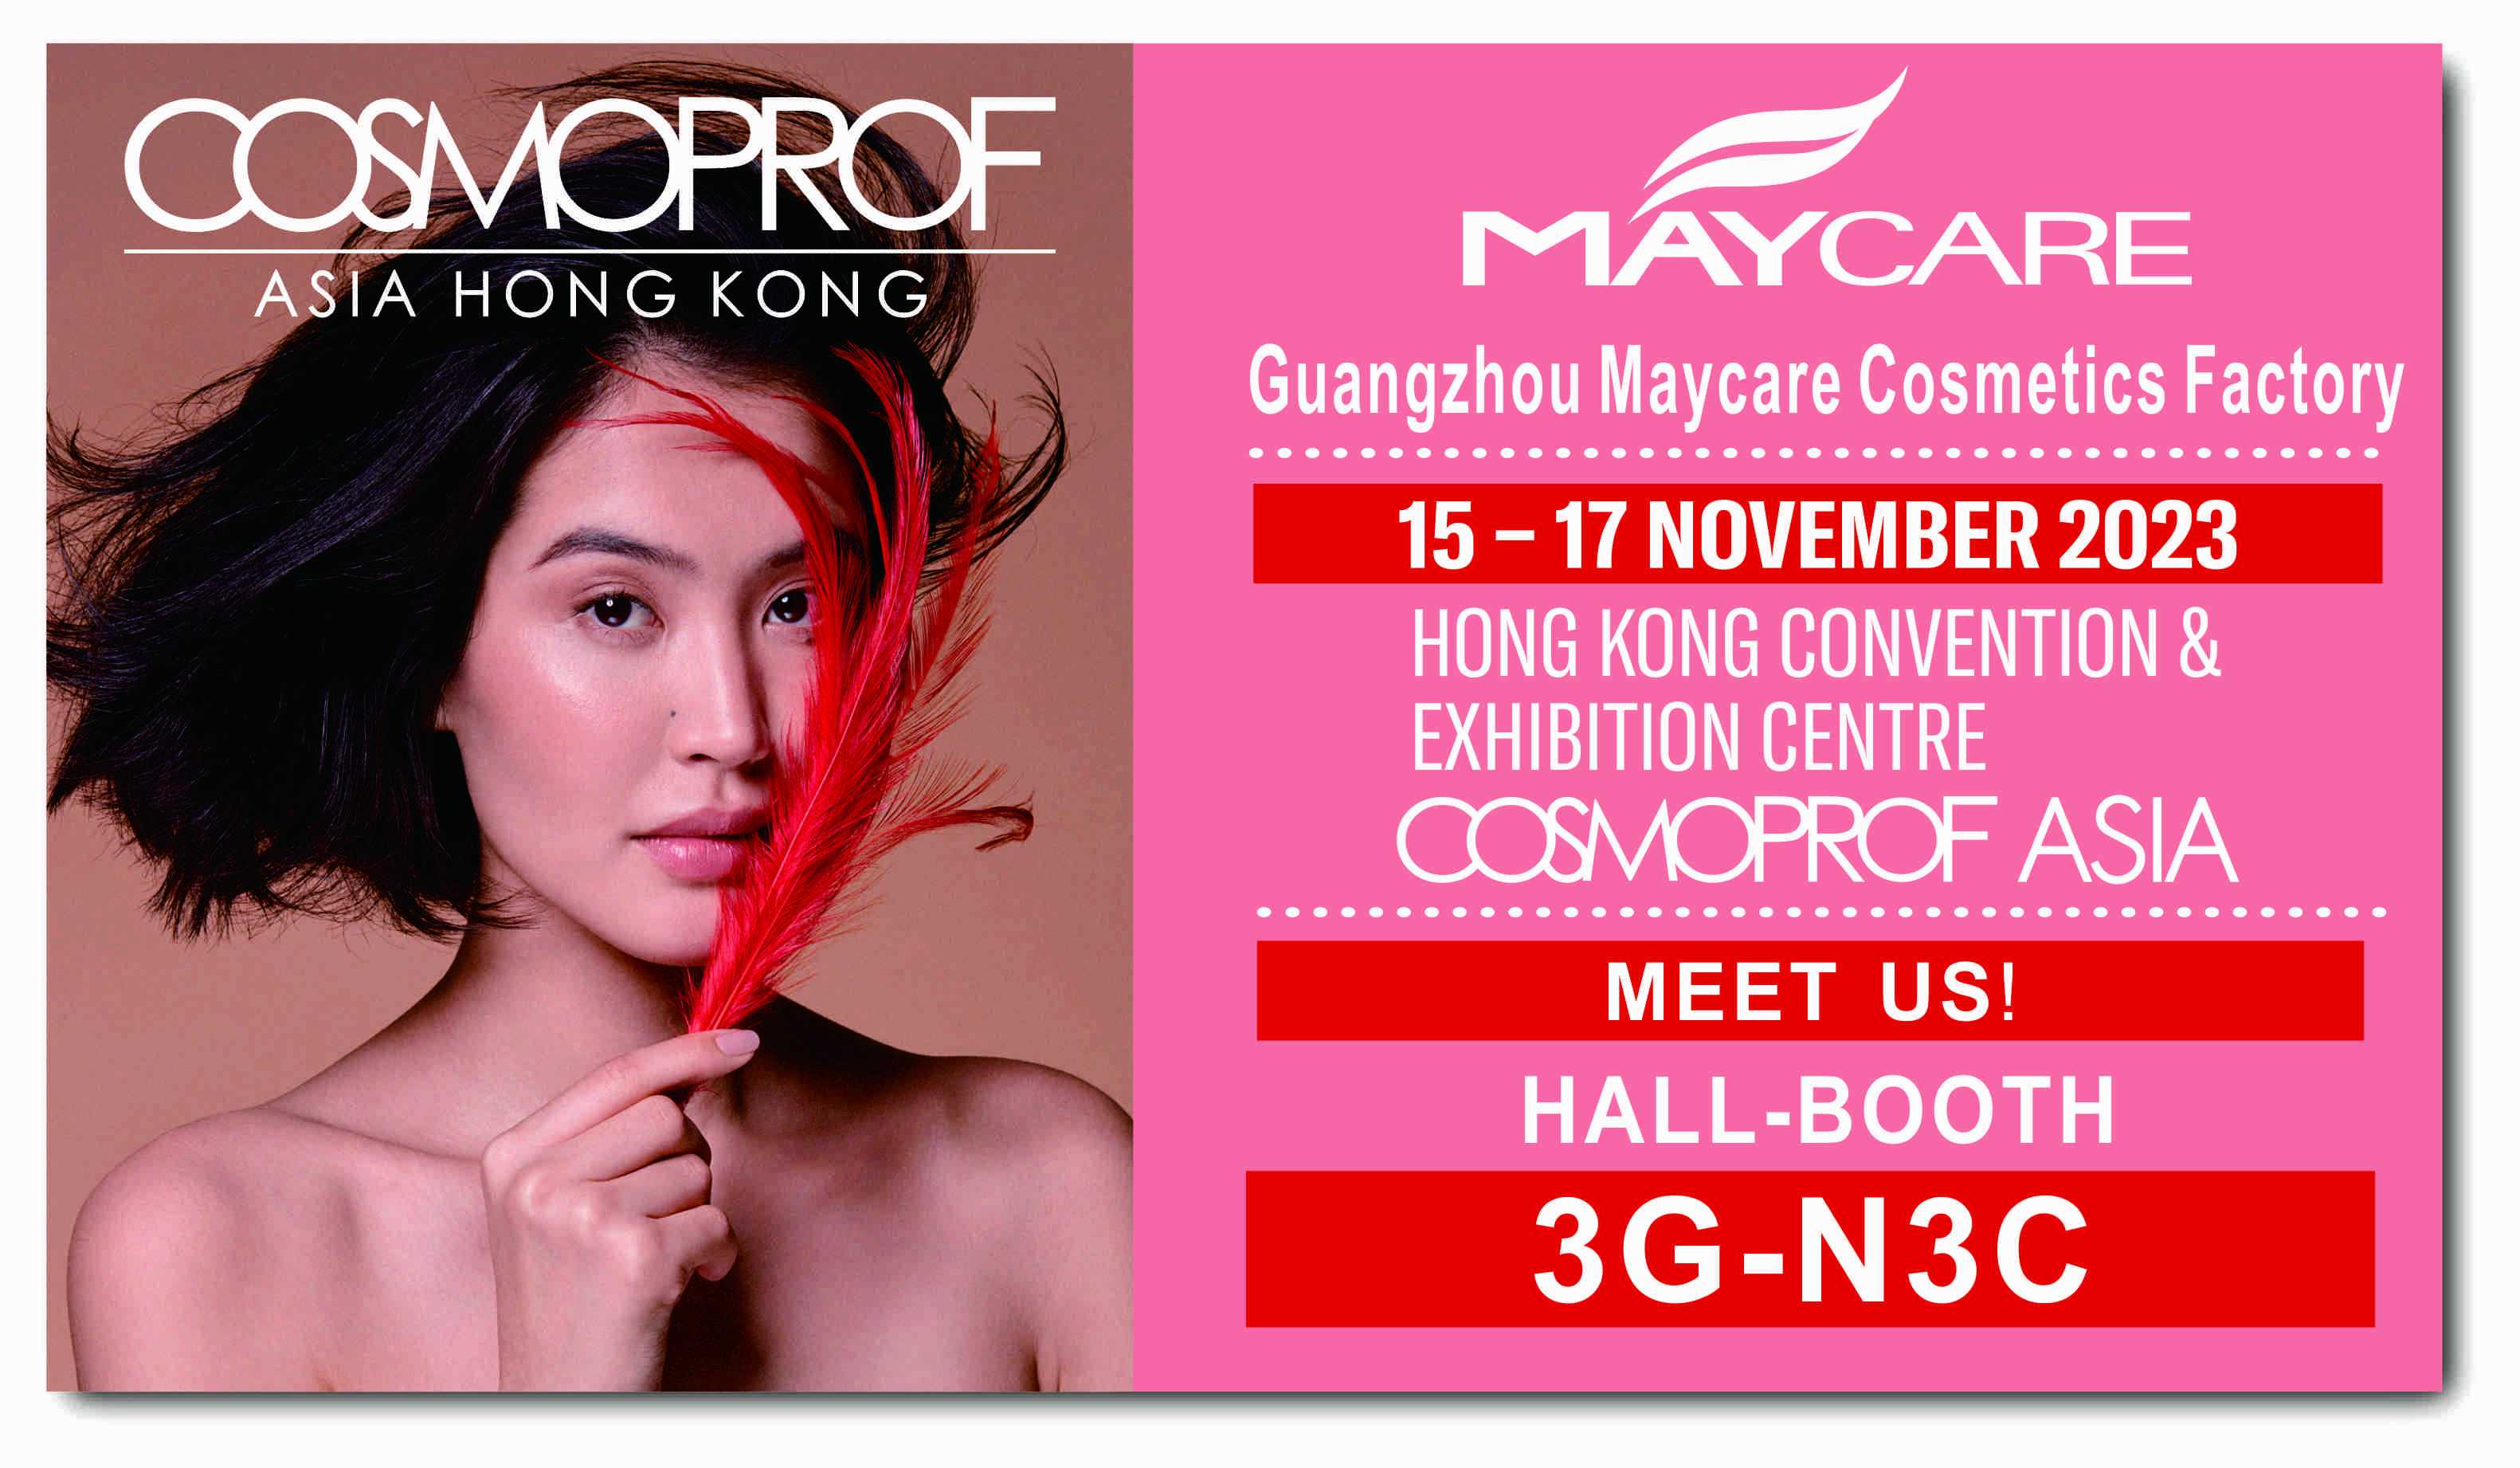 welcome to our booth  at 3G-N3C HongKong Convention& Exhibition Centre Cosmoprof Asia from 15th November to 17th November 2023.